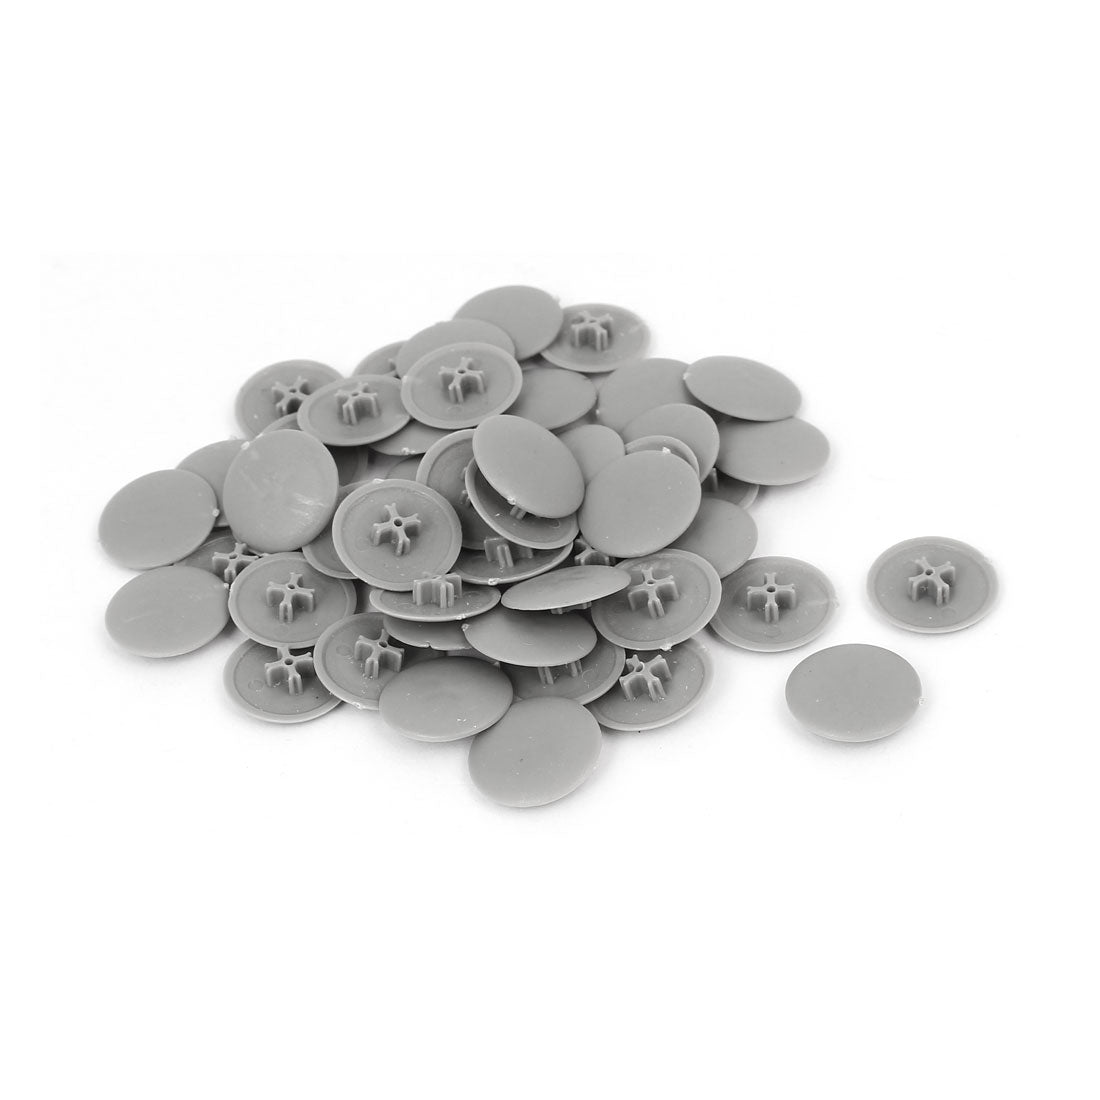 uxcell Uxcell 17mm x 4mm Plastic Round Phillips Screw Cap Cross Head Cover Gray 50pcs